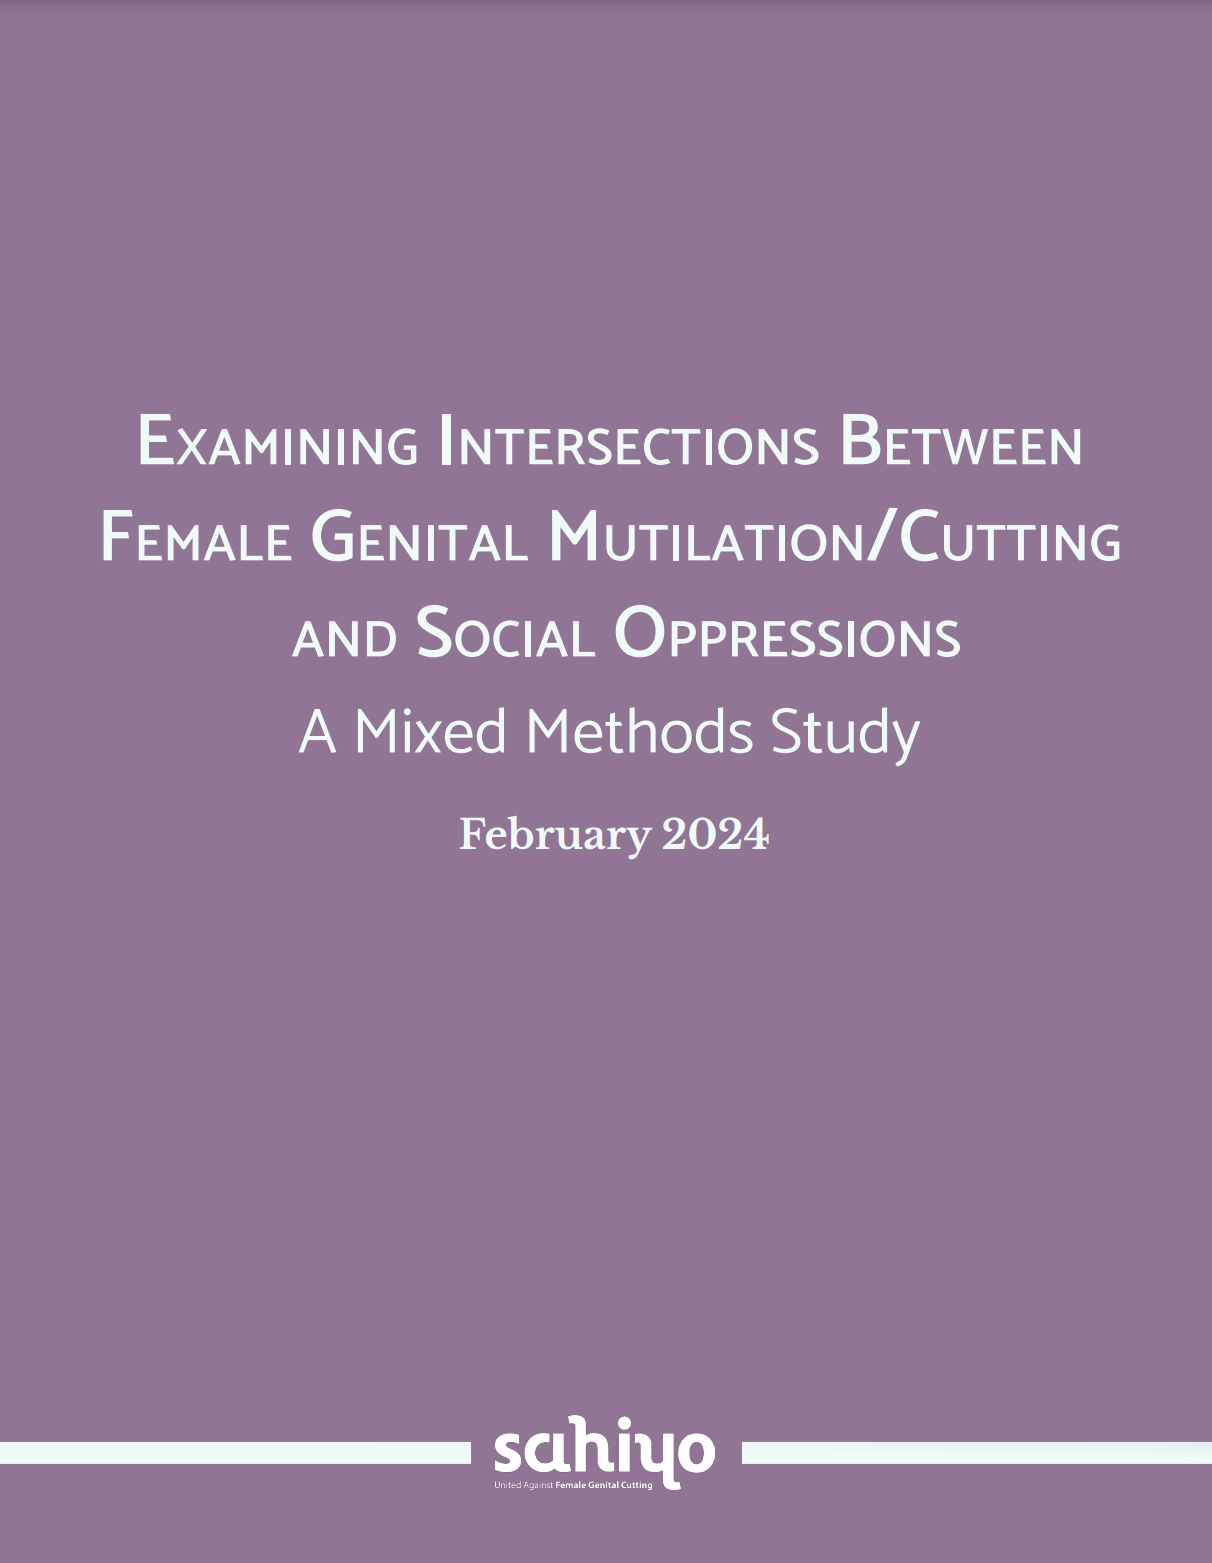 This image for Examining Intersections Between Female Genital Mutilation/Cutting And Social Oppressions: A Mixed Methods Study